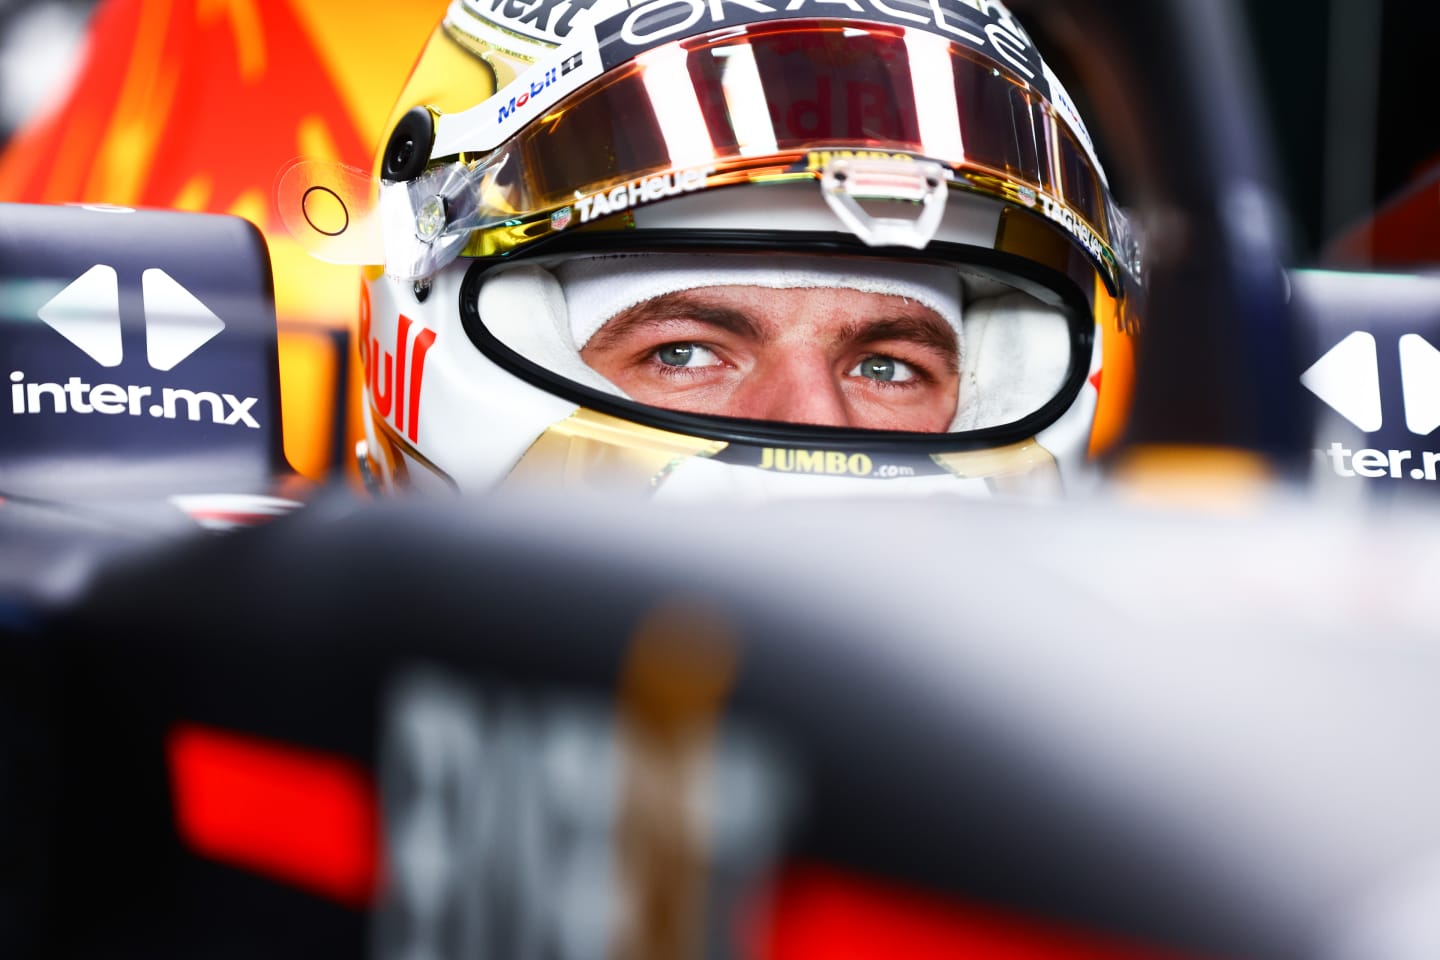 IMOLA, ITALY - APRIL 23: Max Verstappen of the Netherlands and Oracle Red Bull Racing prepares to drive in the garage prior to Sprint ahead of the F1 Grand Prix of Emilia Romagna at Autodromo Enzo e Dino Ferrari on April 23, 2022 in Imola, Italy. (Photo by Mark Thompson/Getty Images)